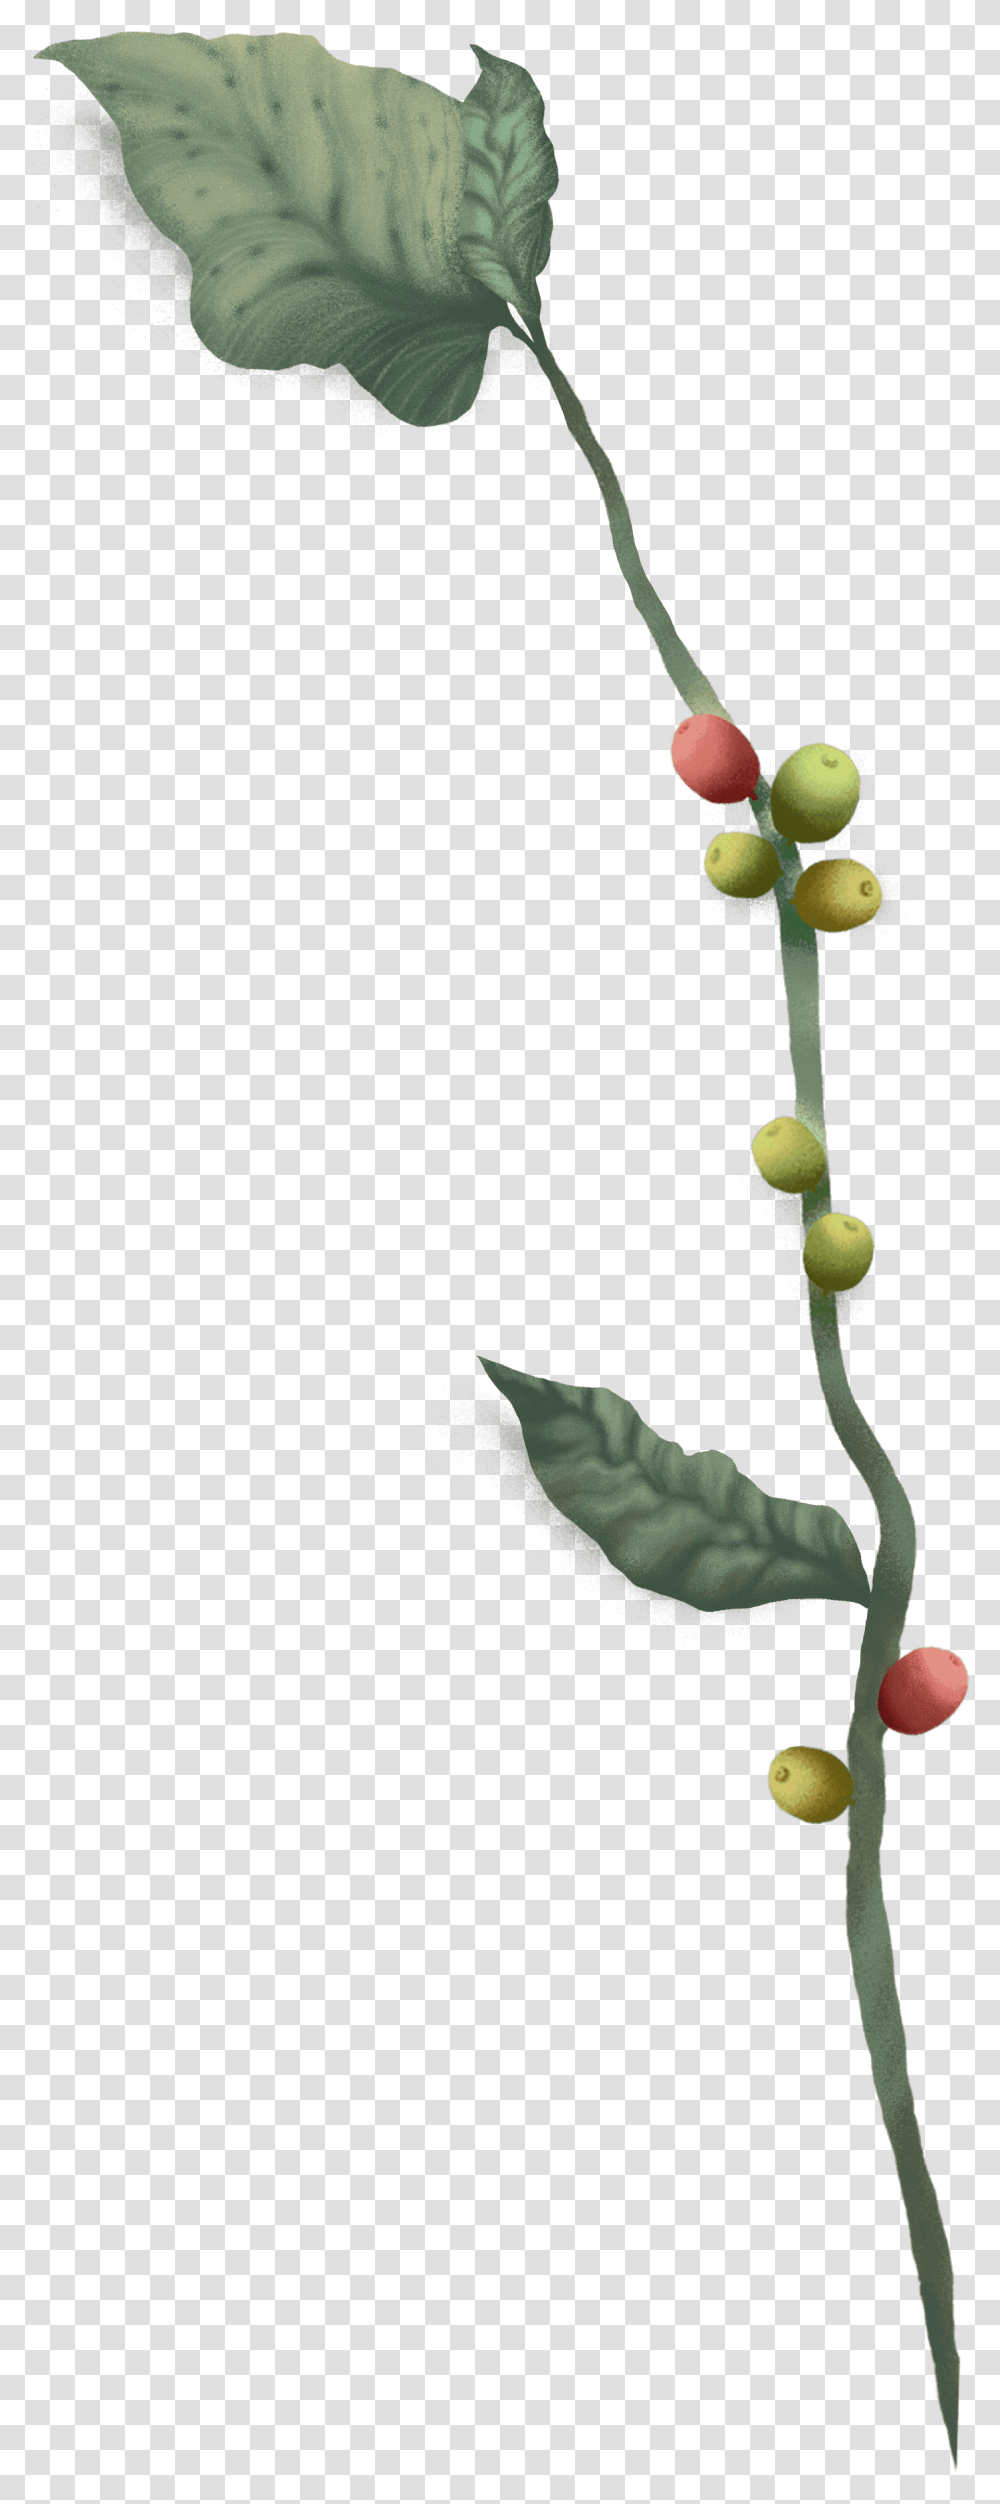 Twig, Bud, Sprout, Flower, Plant Transparent Png